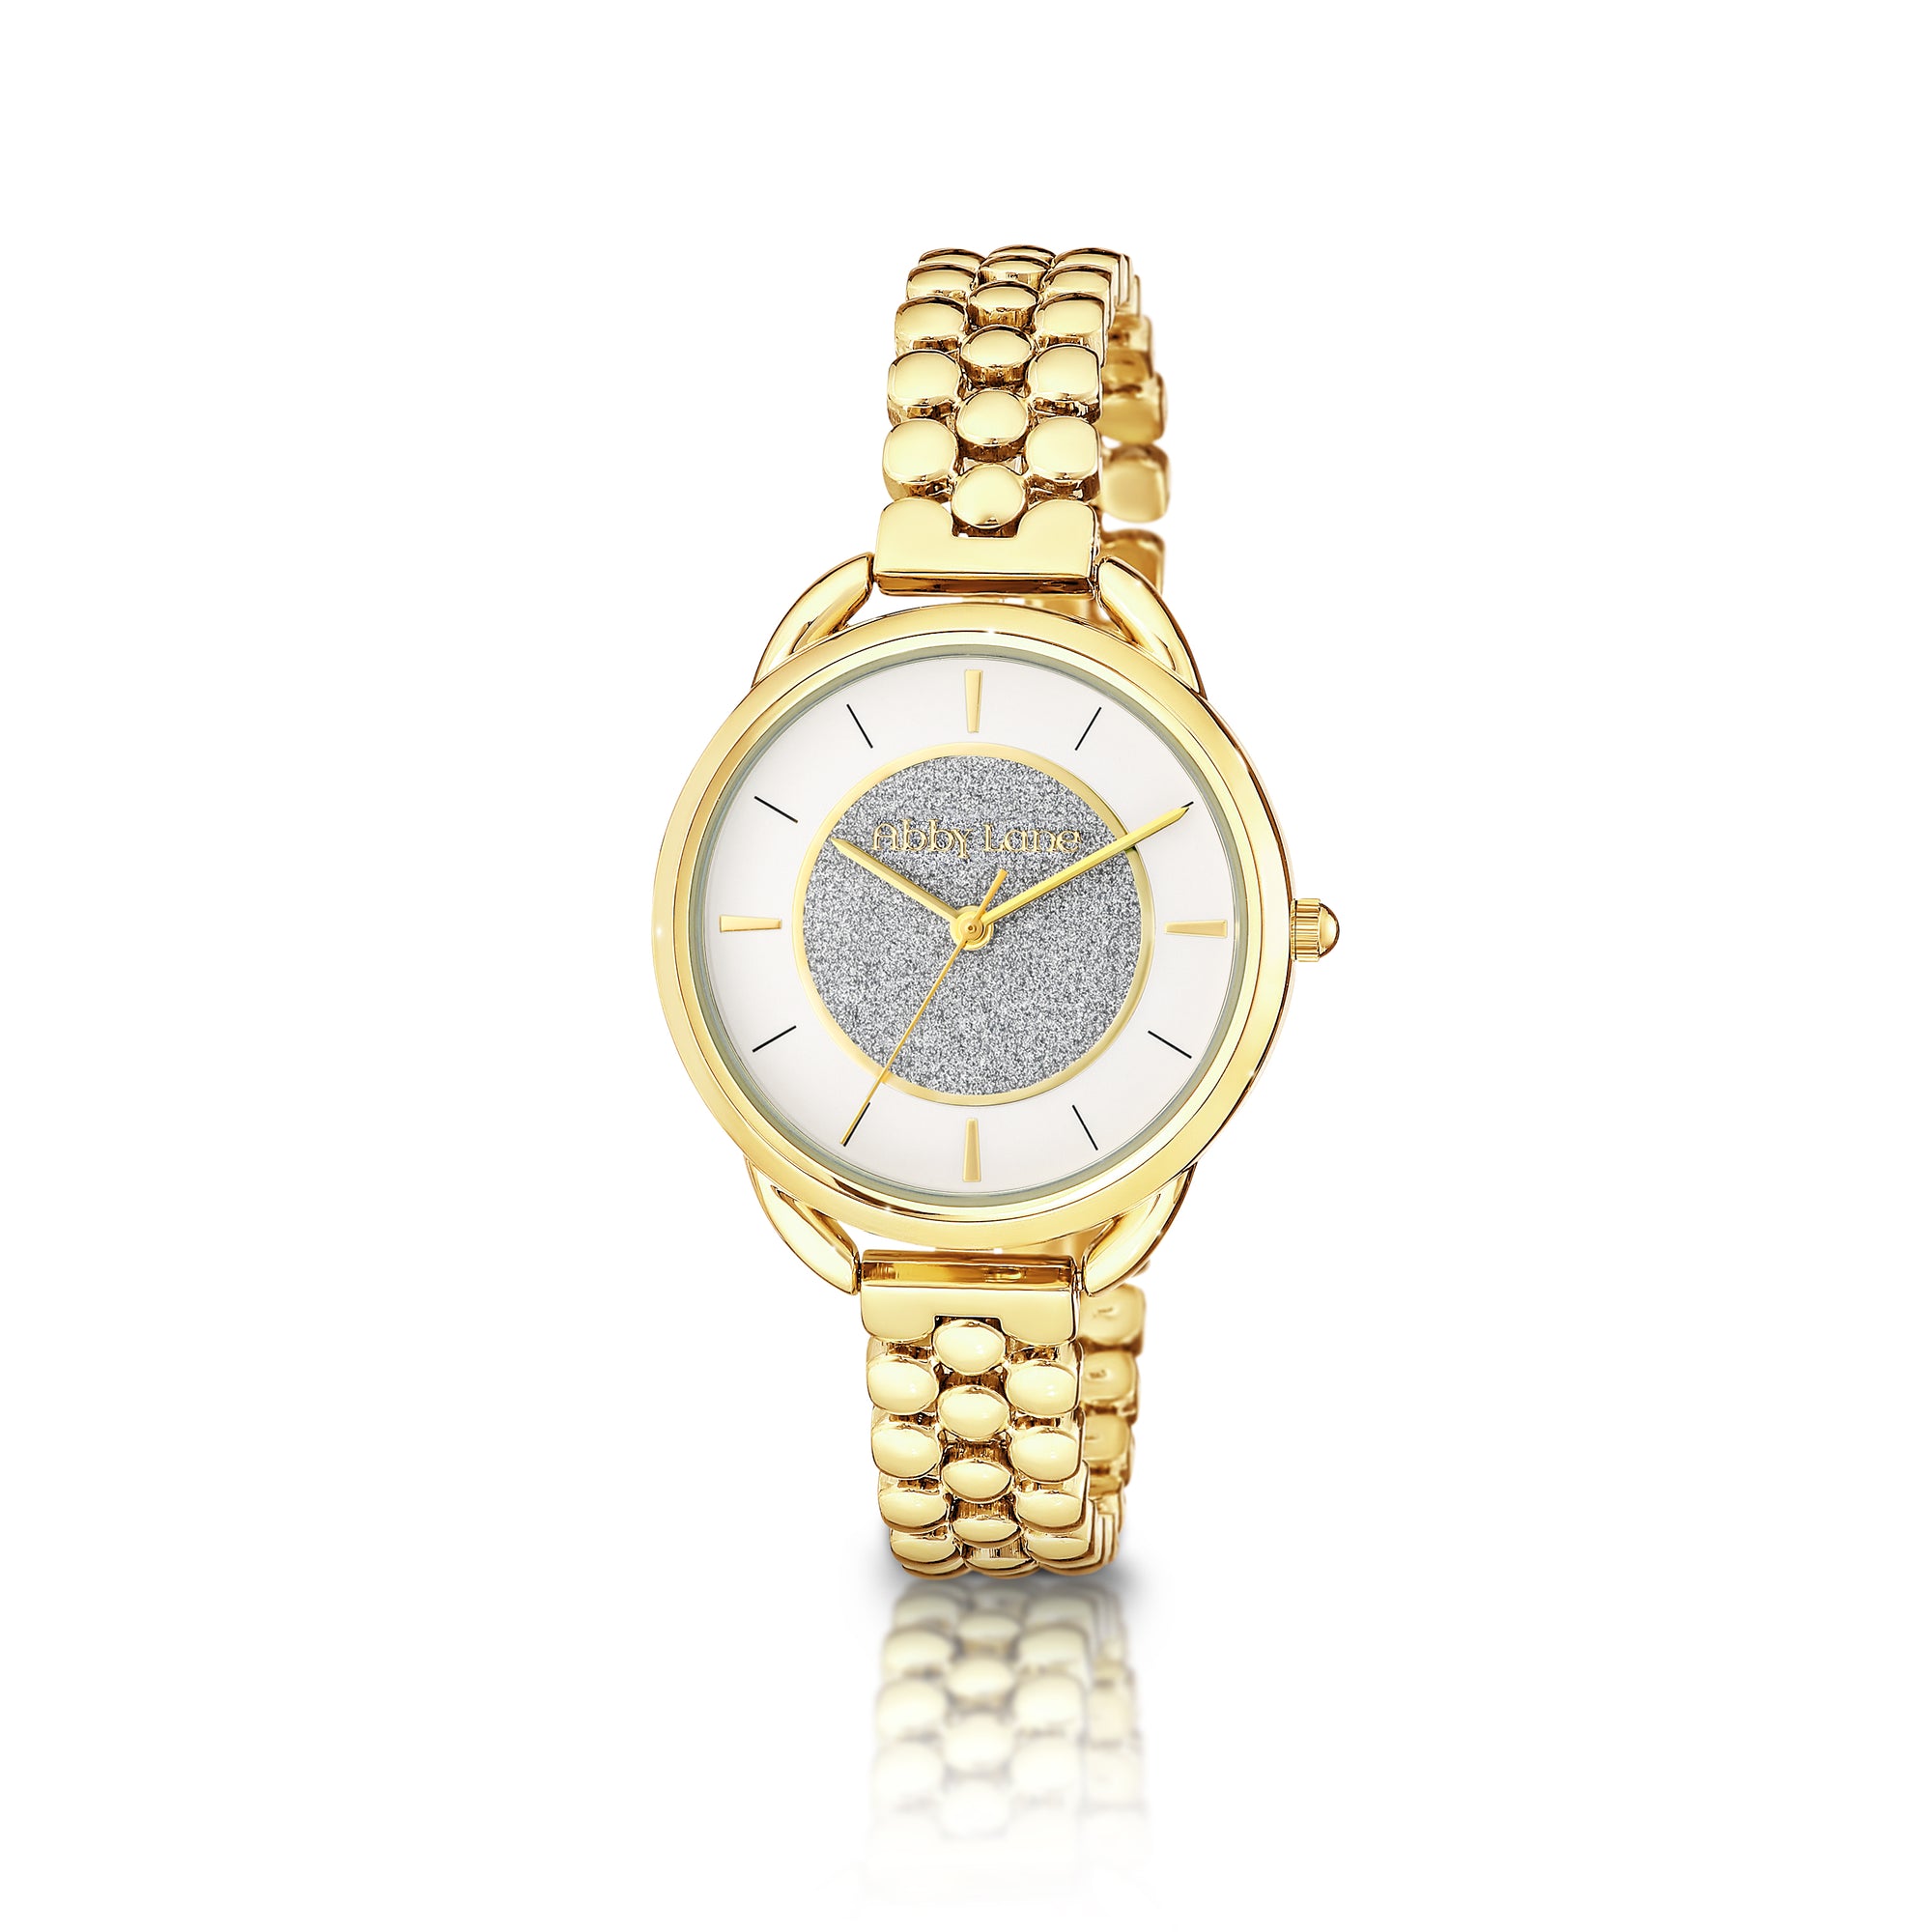 Abby Lane 'Victoria' Collection Ladies Watch.